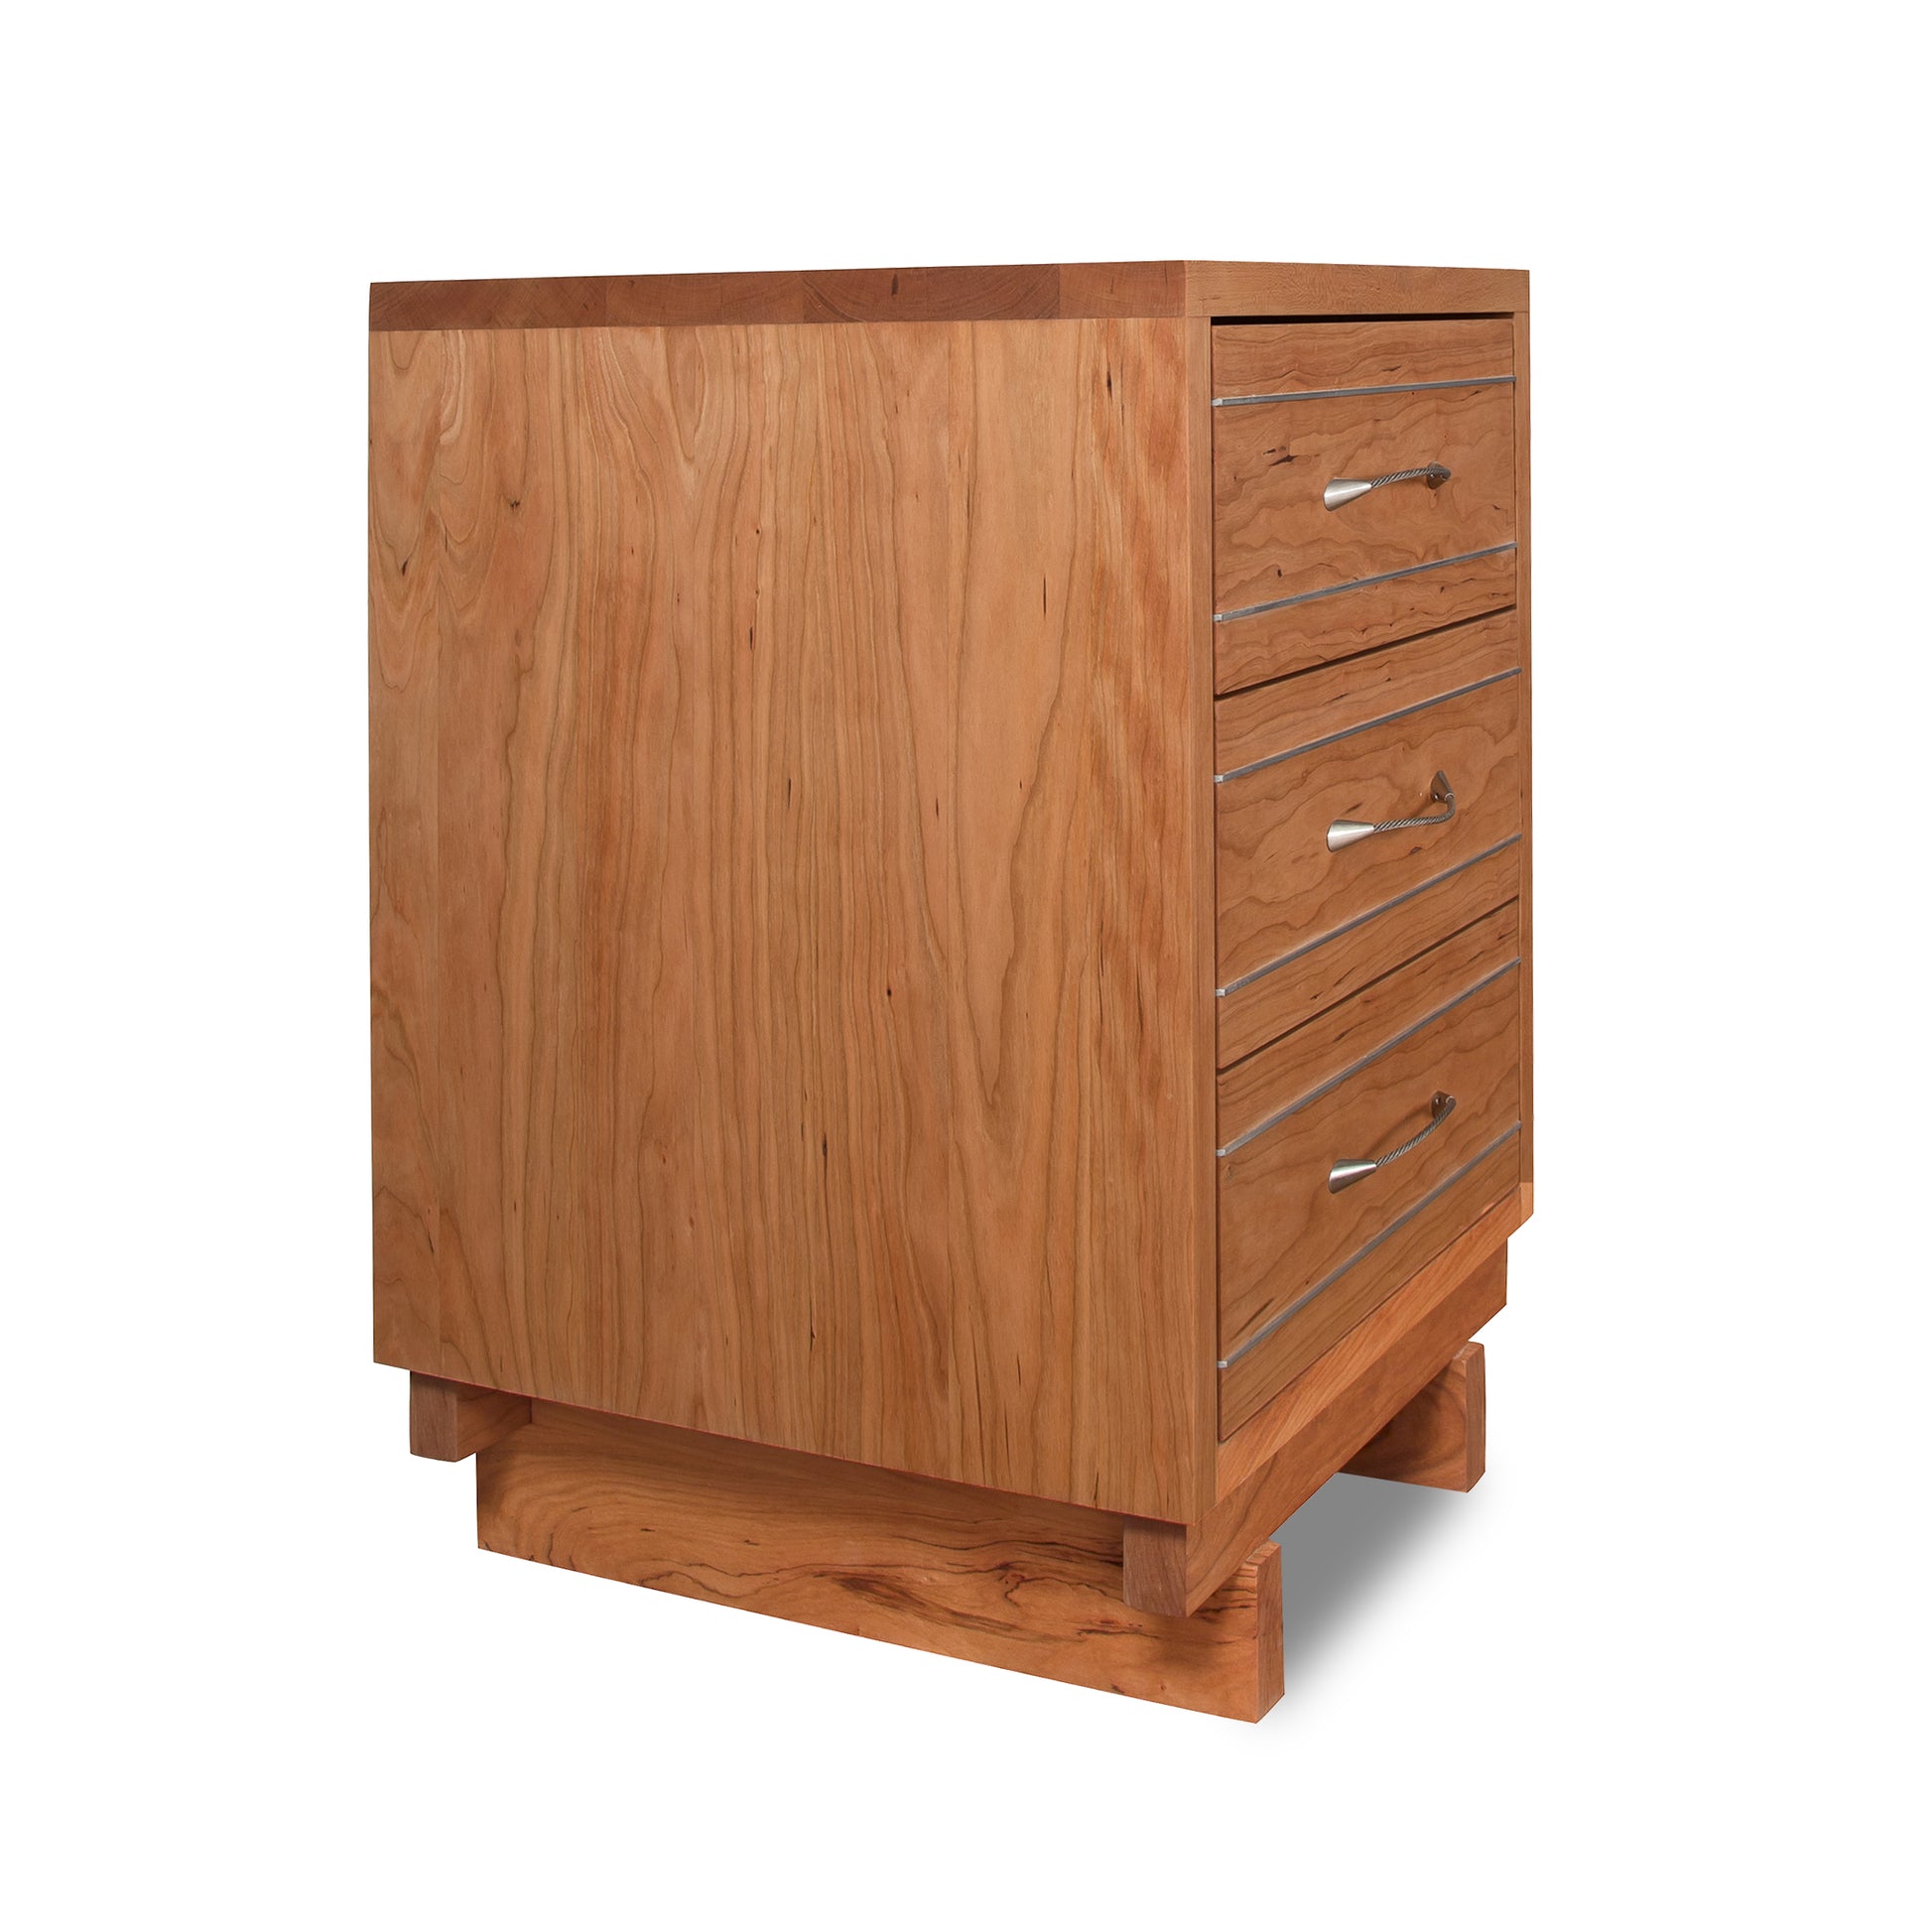 A Vermont Furniture Designs wooden chest of drawers with a closed cabinet on the left and several dovetail drawers with metal handles on the right, isolated on a white background.